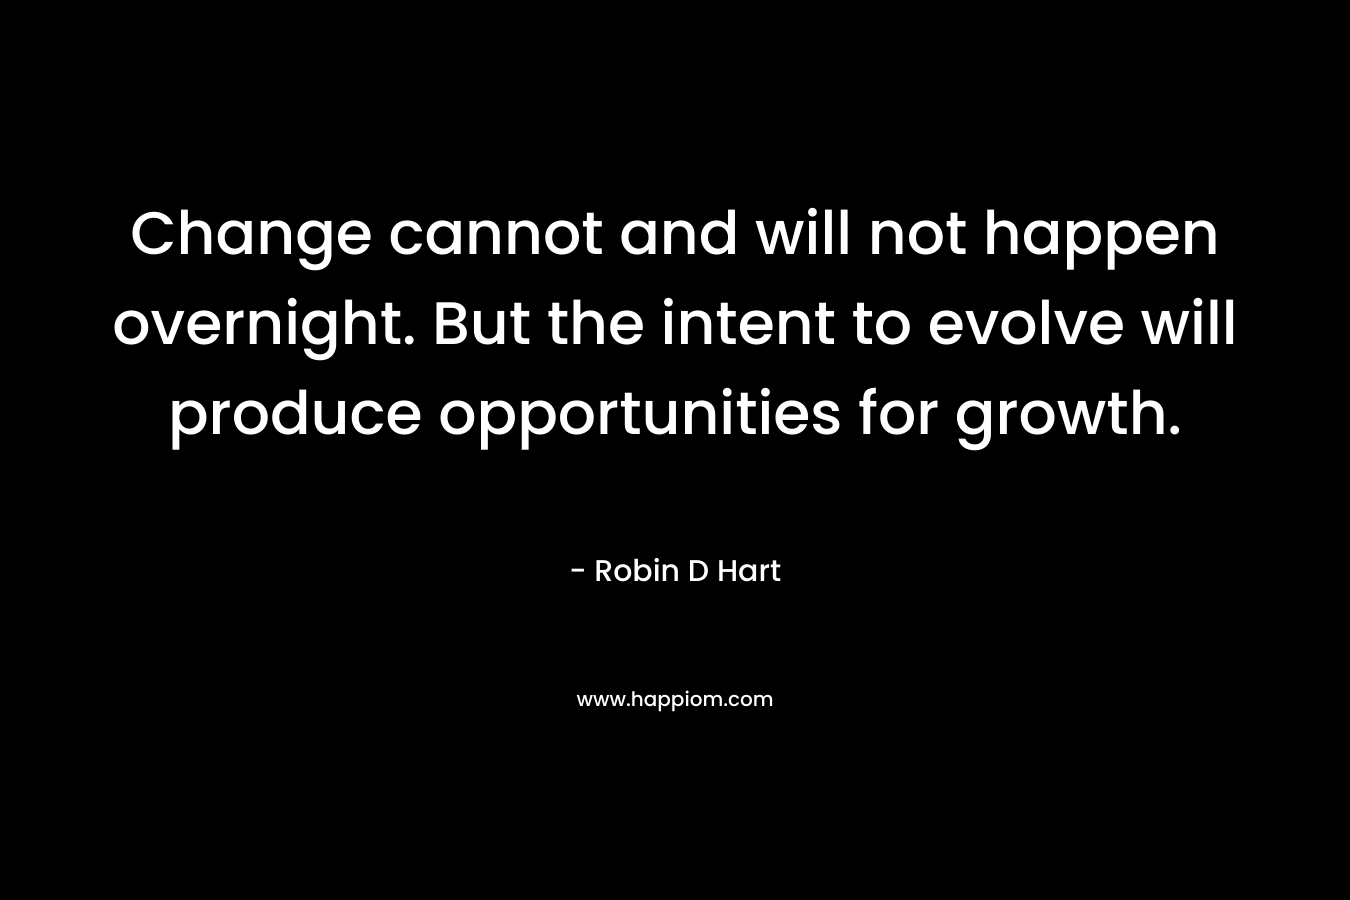 Change cannot and will not happen overnight. But the intent to evolve will produce opportunities for growth.